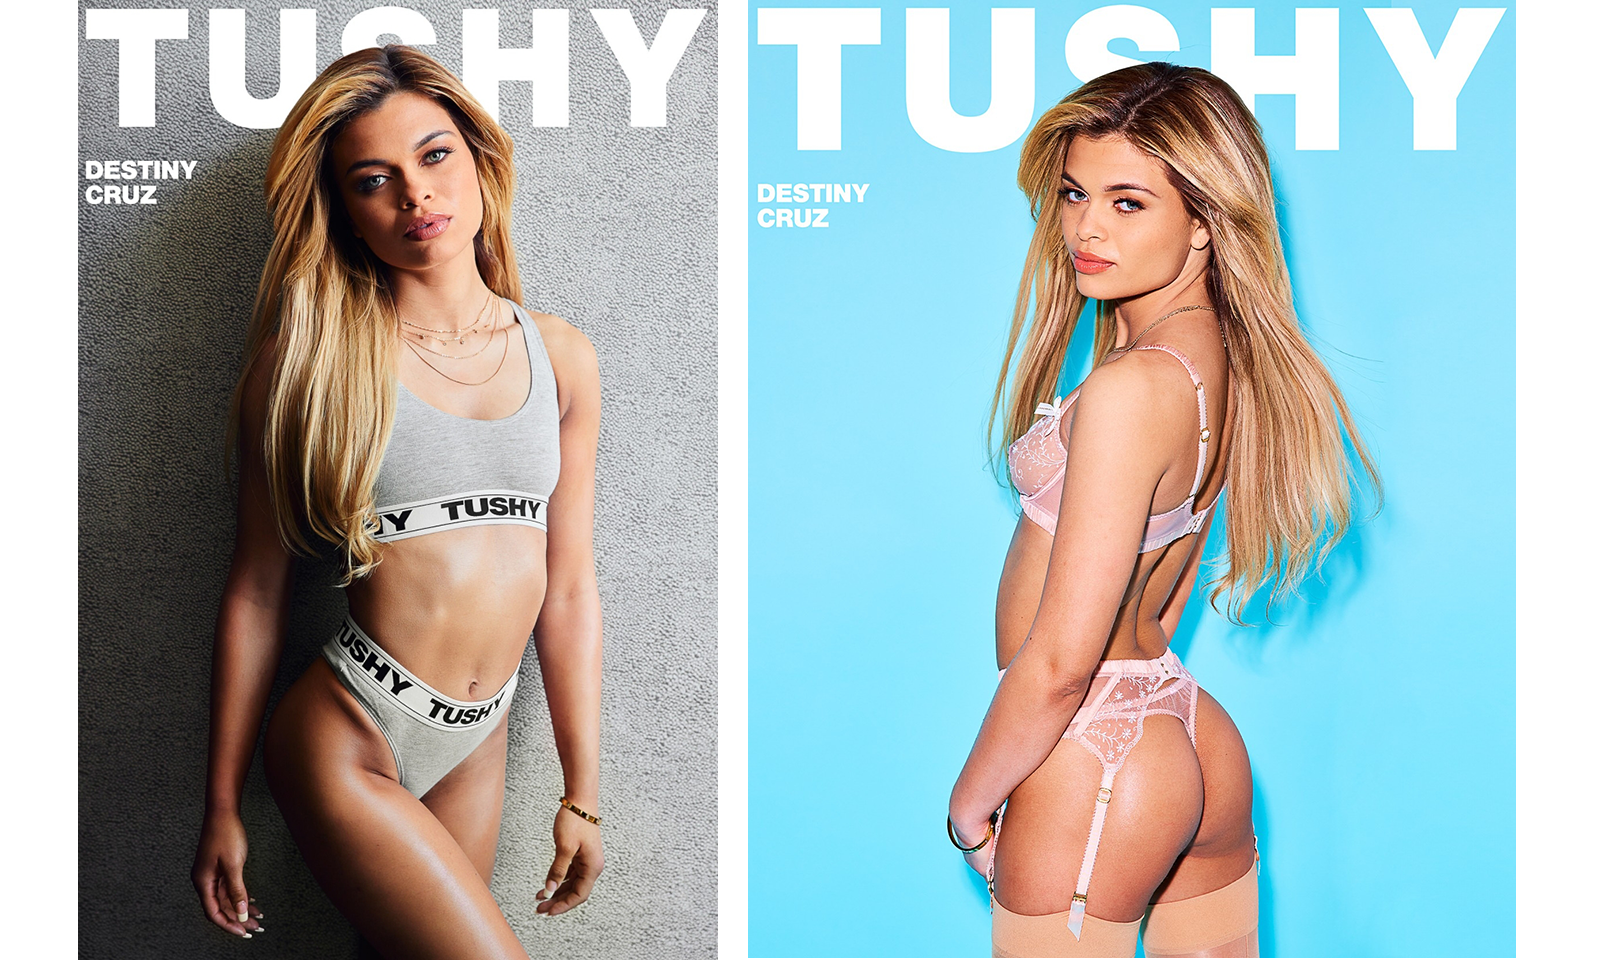 Destiny Cruz's First Anal Is Now Available on Tushy.com